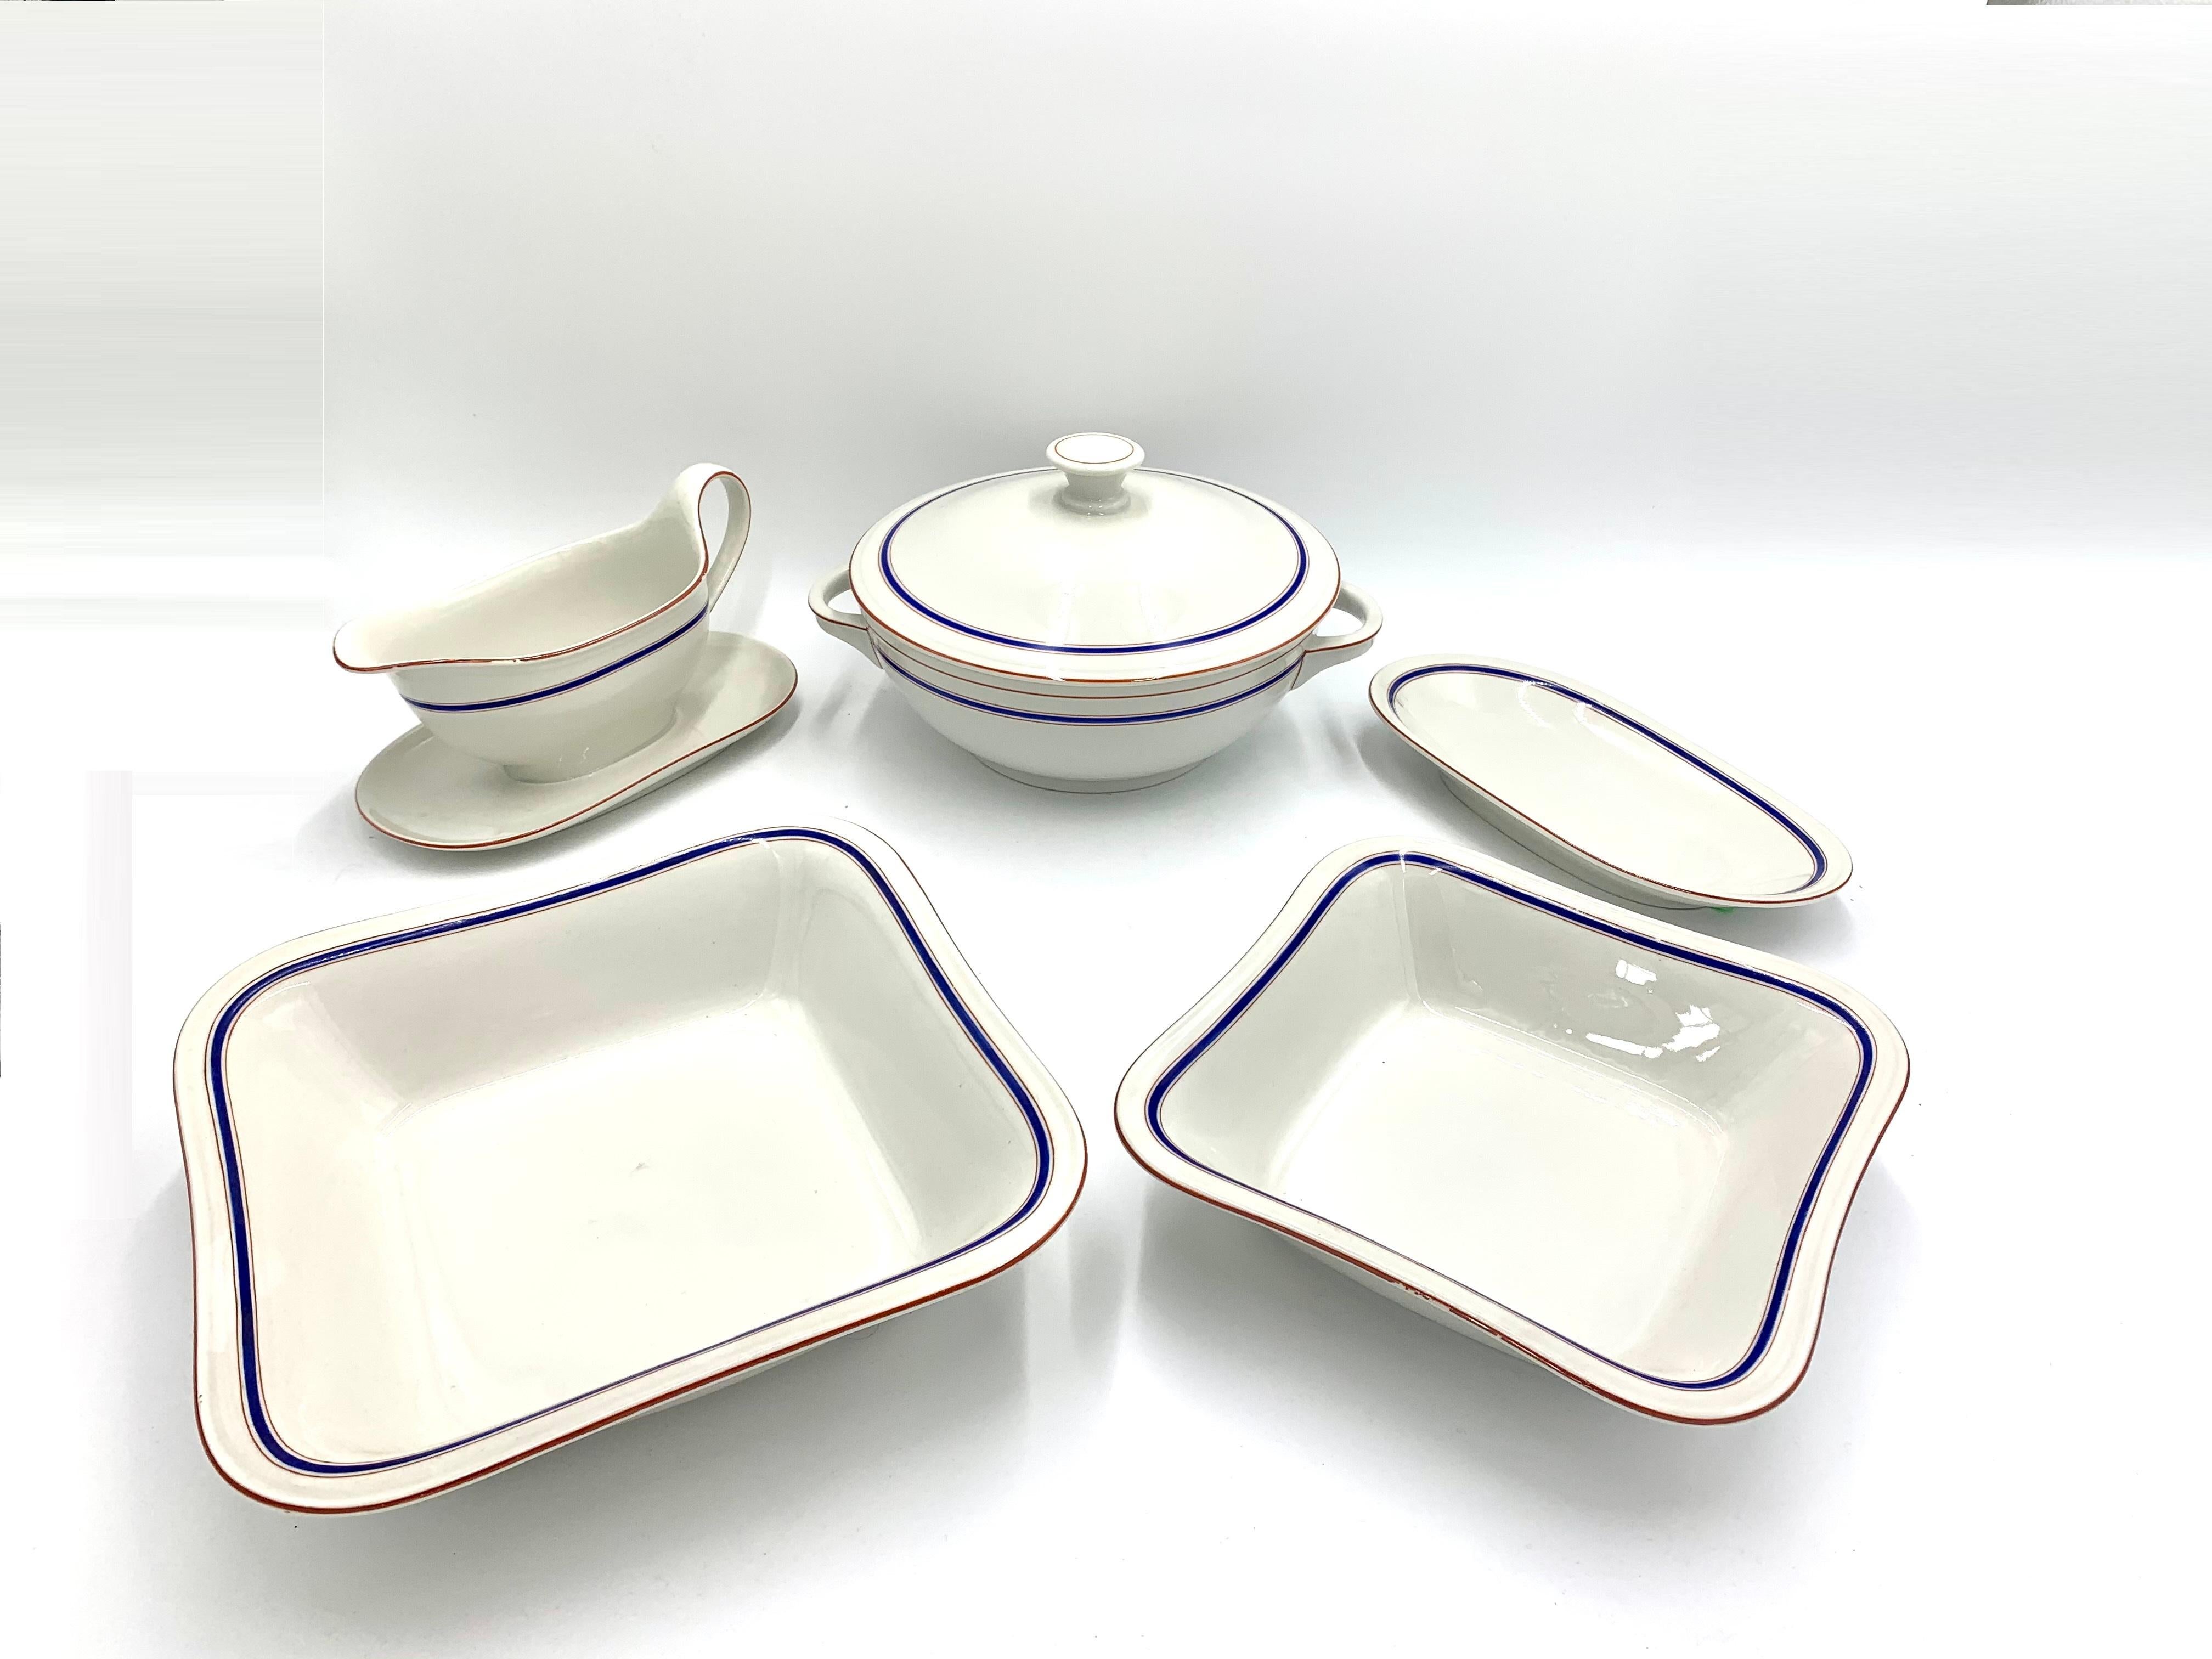 Parts for the Koenigszelt porcelain dinner set with a cornflower pattern.

The set includes:

- vase with a lid: height 16 cm, diameter 24 cm

-square bowl: height 6.5 cm, diameter 21 cm

-square bowl larger: height 6.5 cm, diameter 25